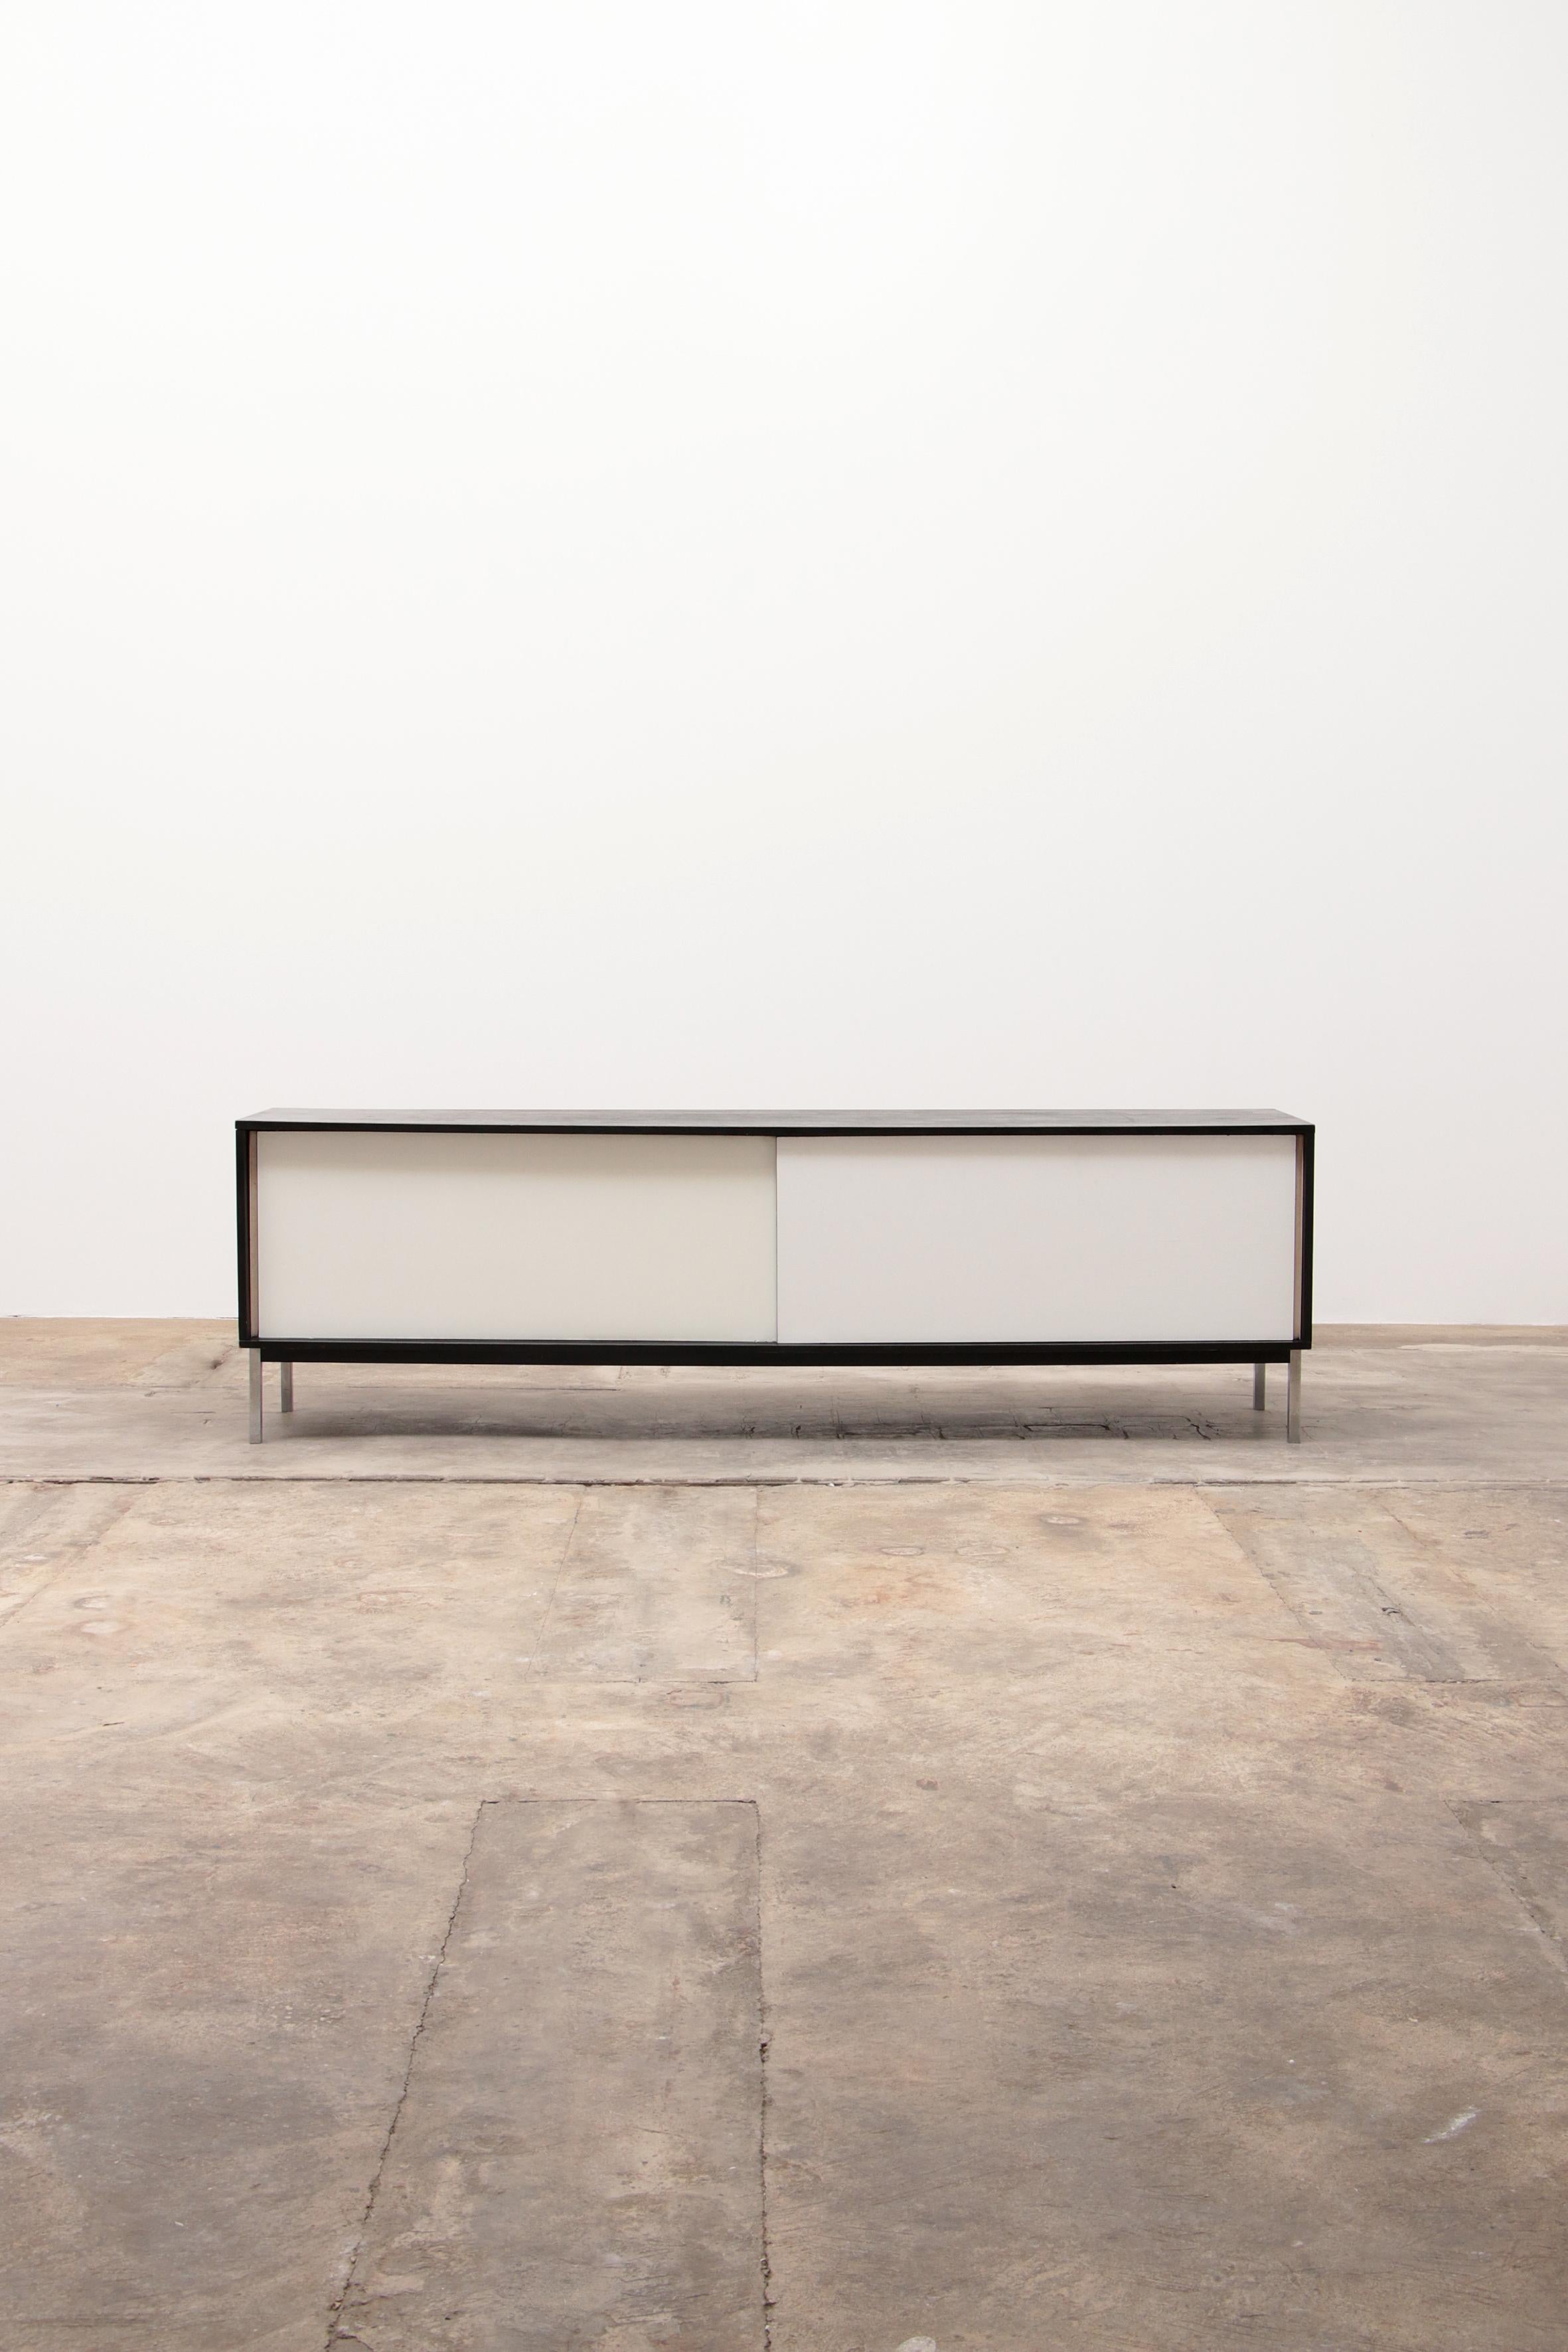 This minimalist and modernist sideboard, model KW85, was designed by Martin Visser for 't Spectrum in the Netherlands in 1965.

It is made of black lacquered veneer and has white sliding doors and a hidden drawer, all on a metal base. Right